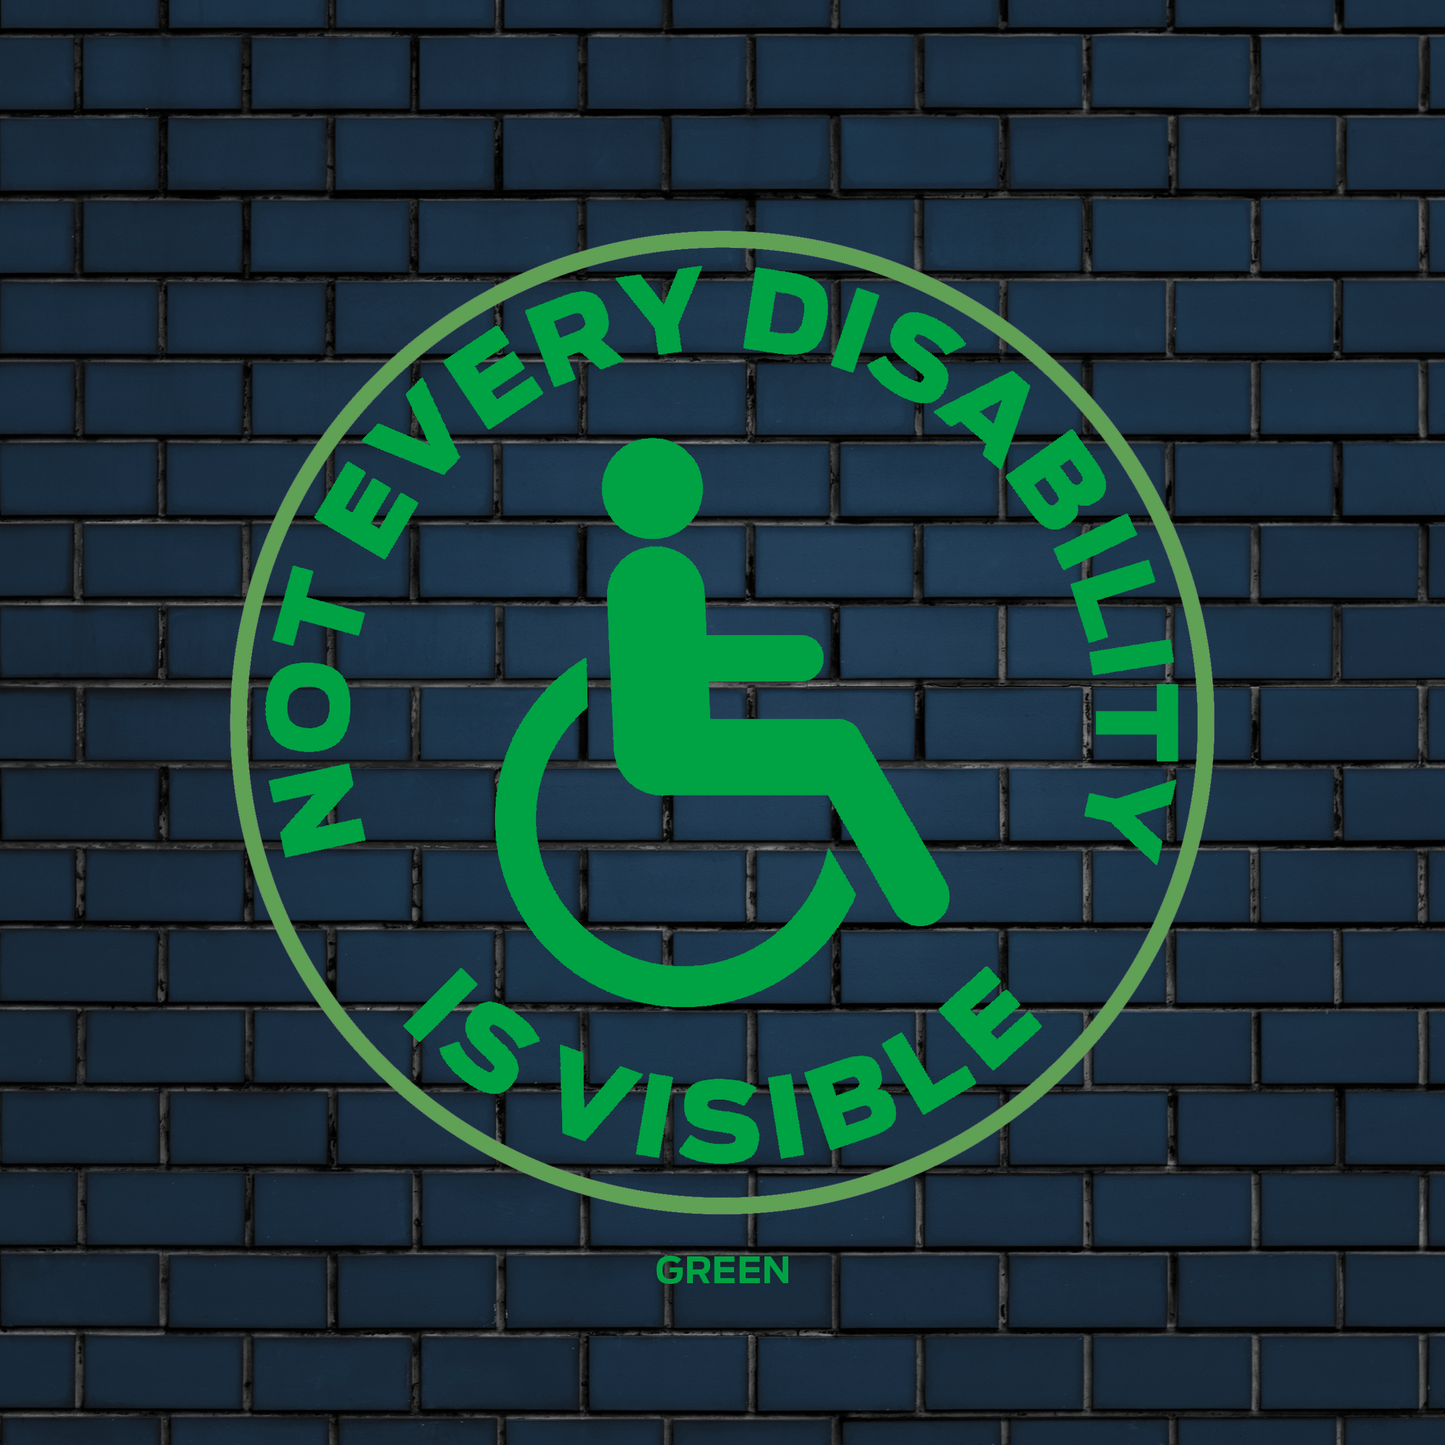 Not Every Disability is Visible car decal | Disability Sticker | Disability Car